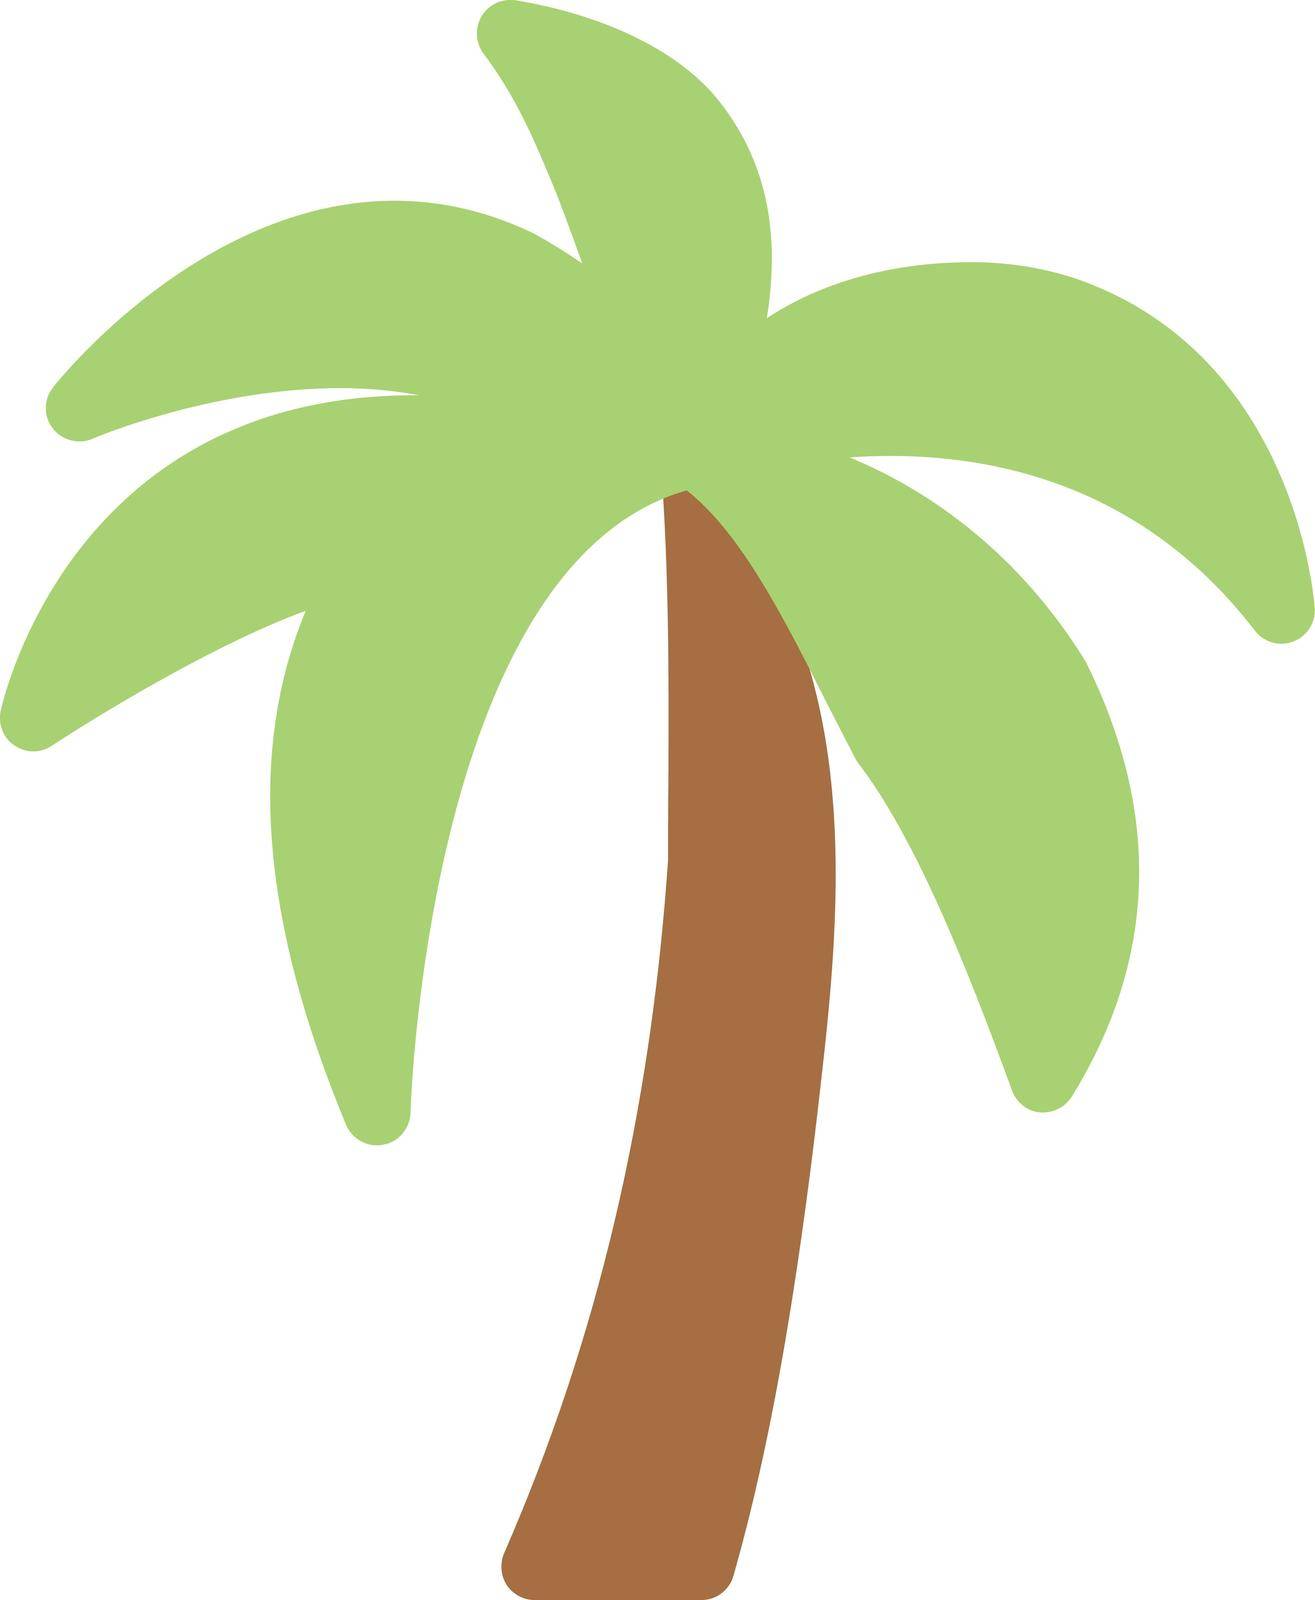 palm Vector illustration on a transparent background. Premium quality symmbols. Line Color vector icons for concept and graphic design.